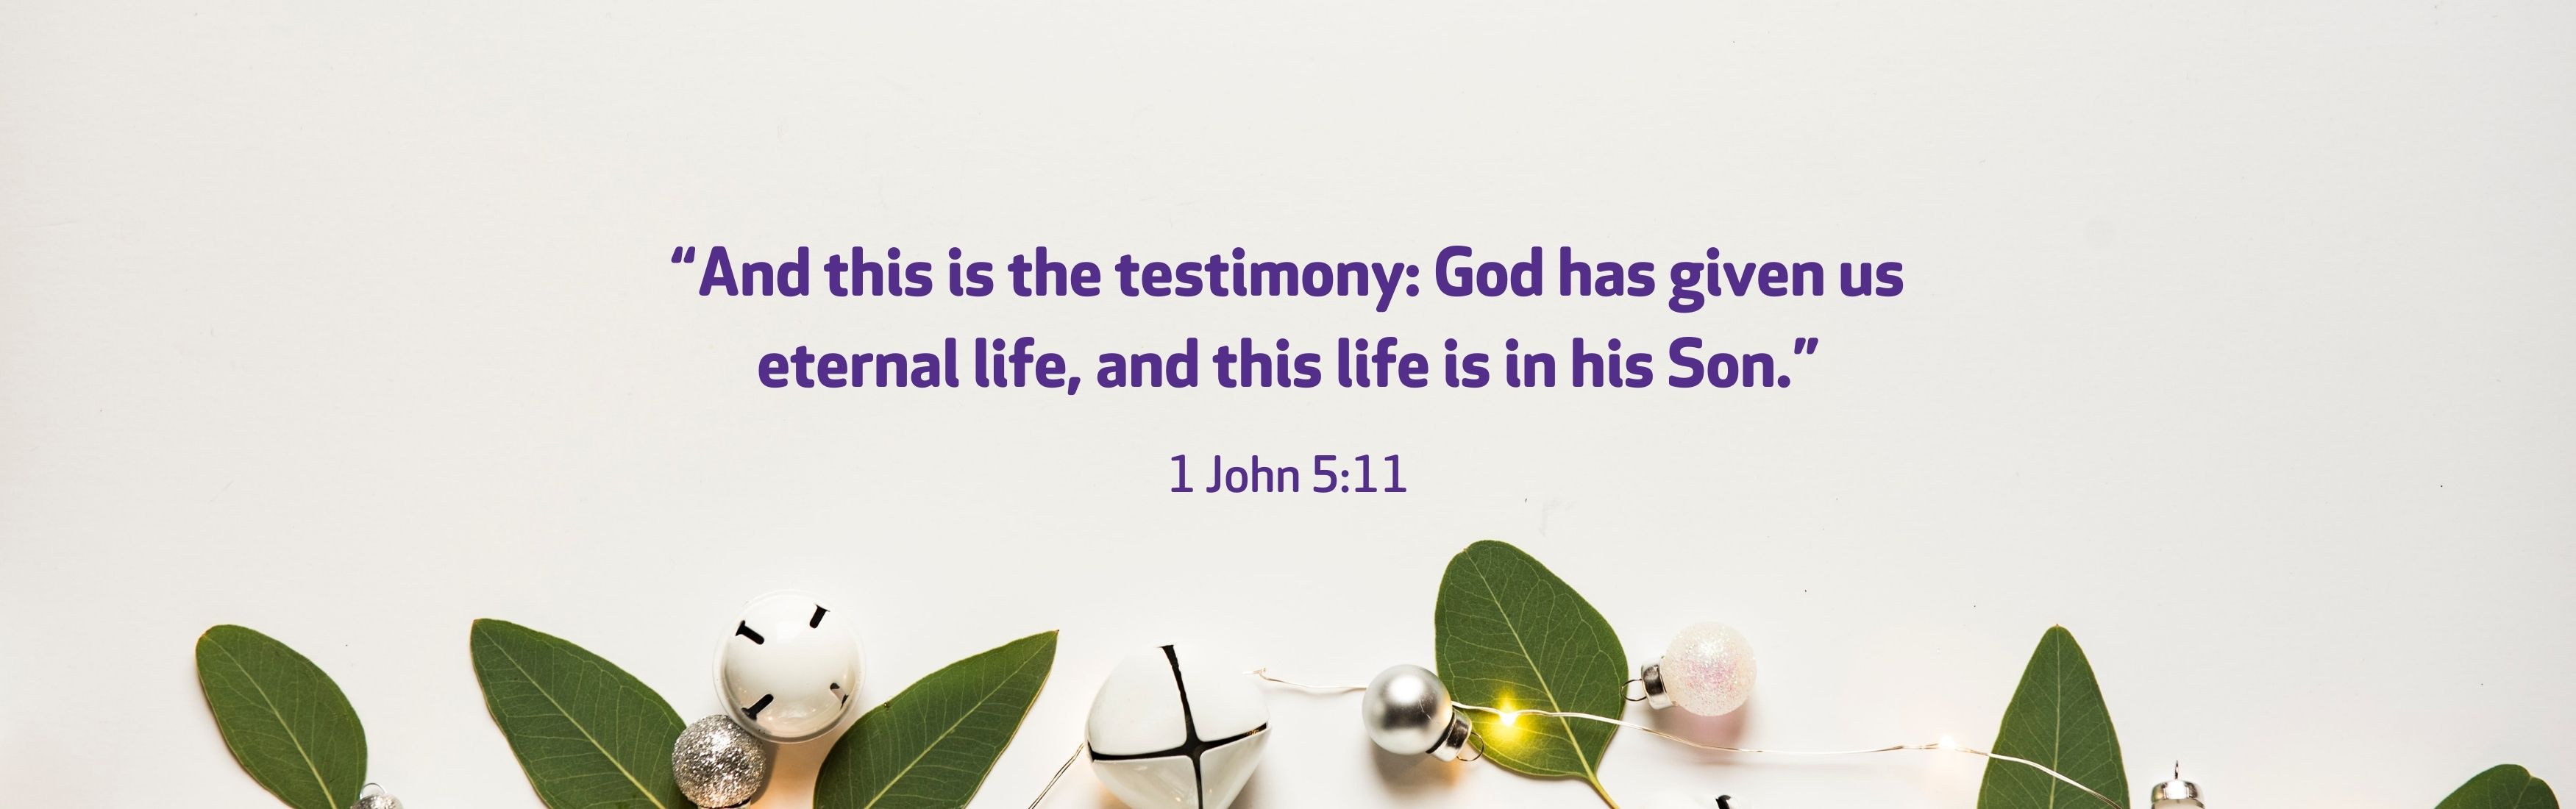 1 John 5:11 “And this is the testimony: God has given us eternal life, and this life is in his Son.” 